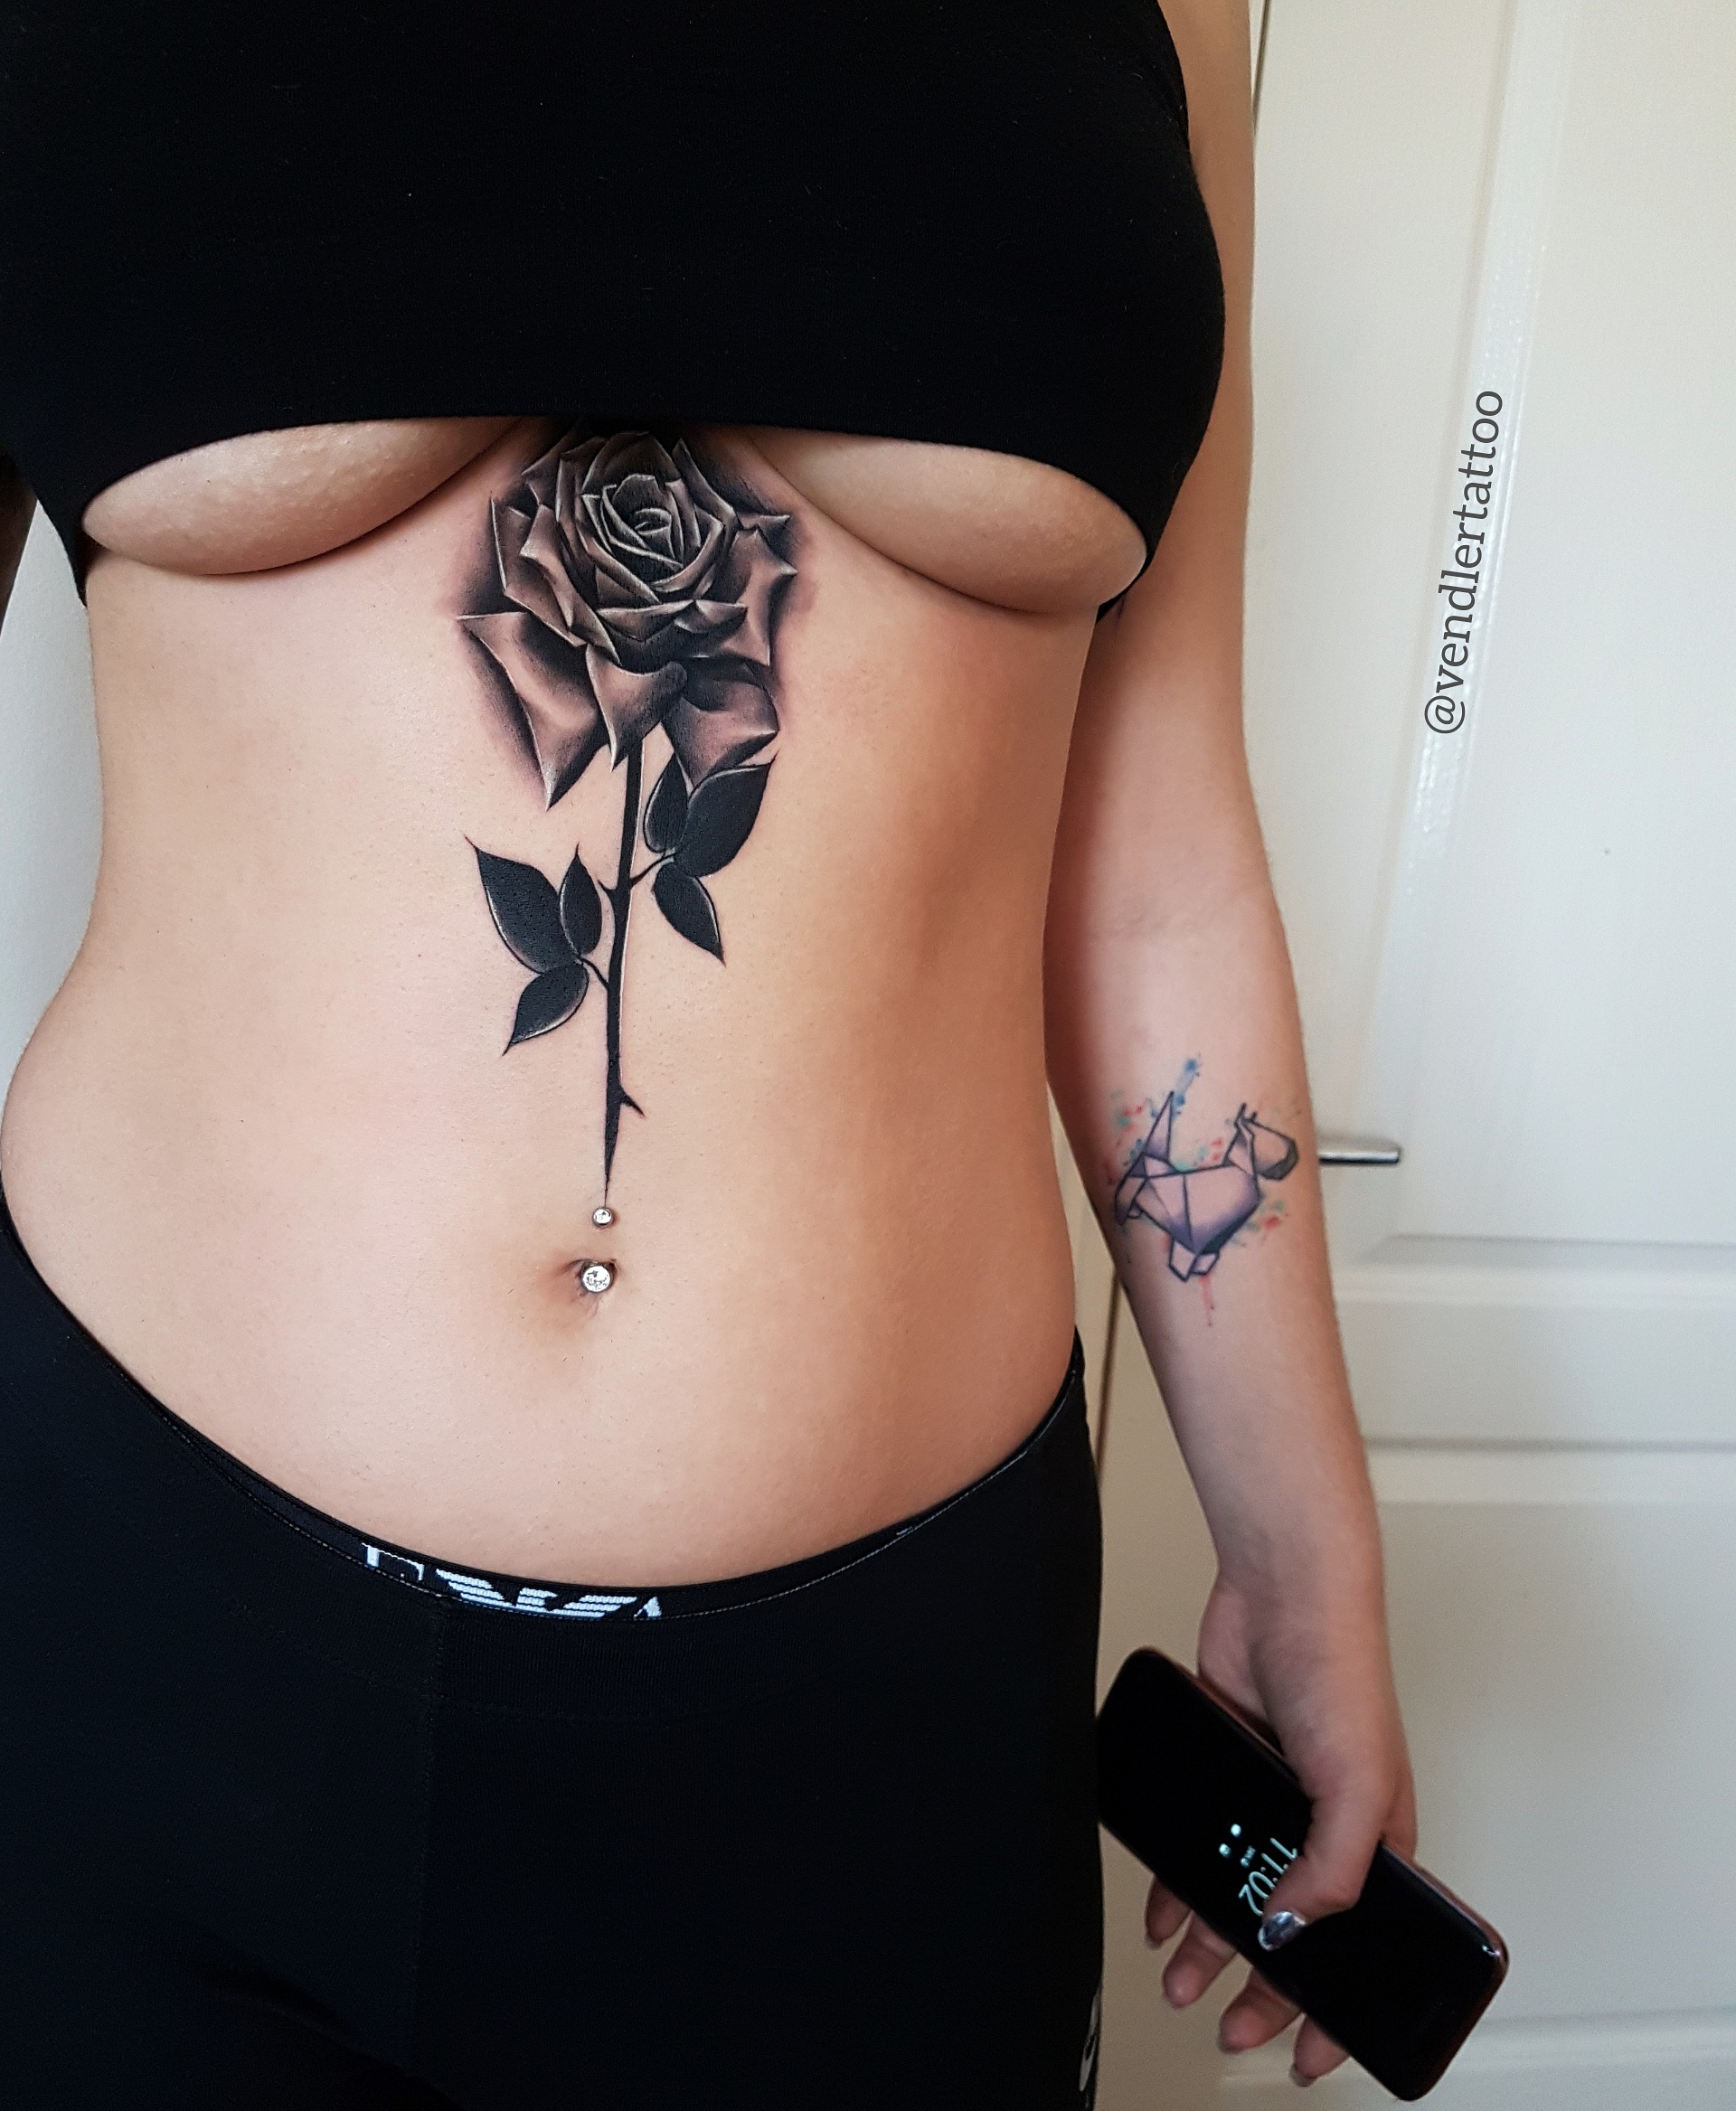 Girl Chest Tattoos 94 Images In Collection Page 2 for dimensions 1920 X 2335